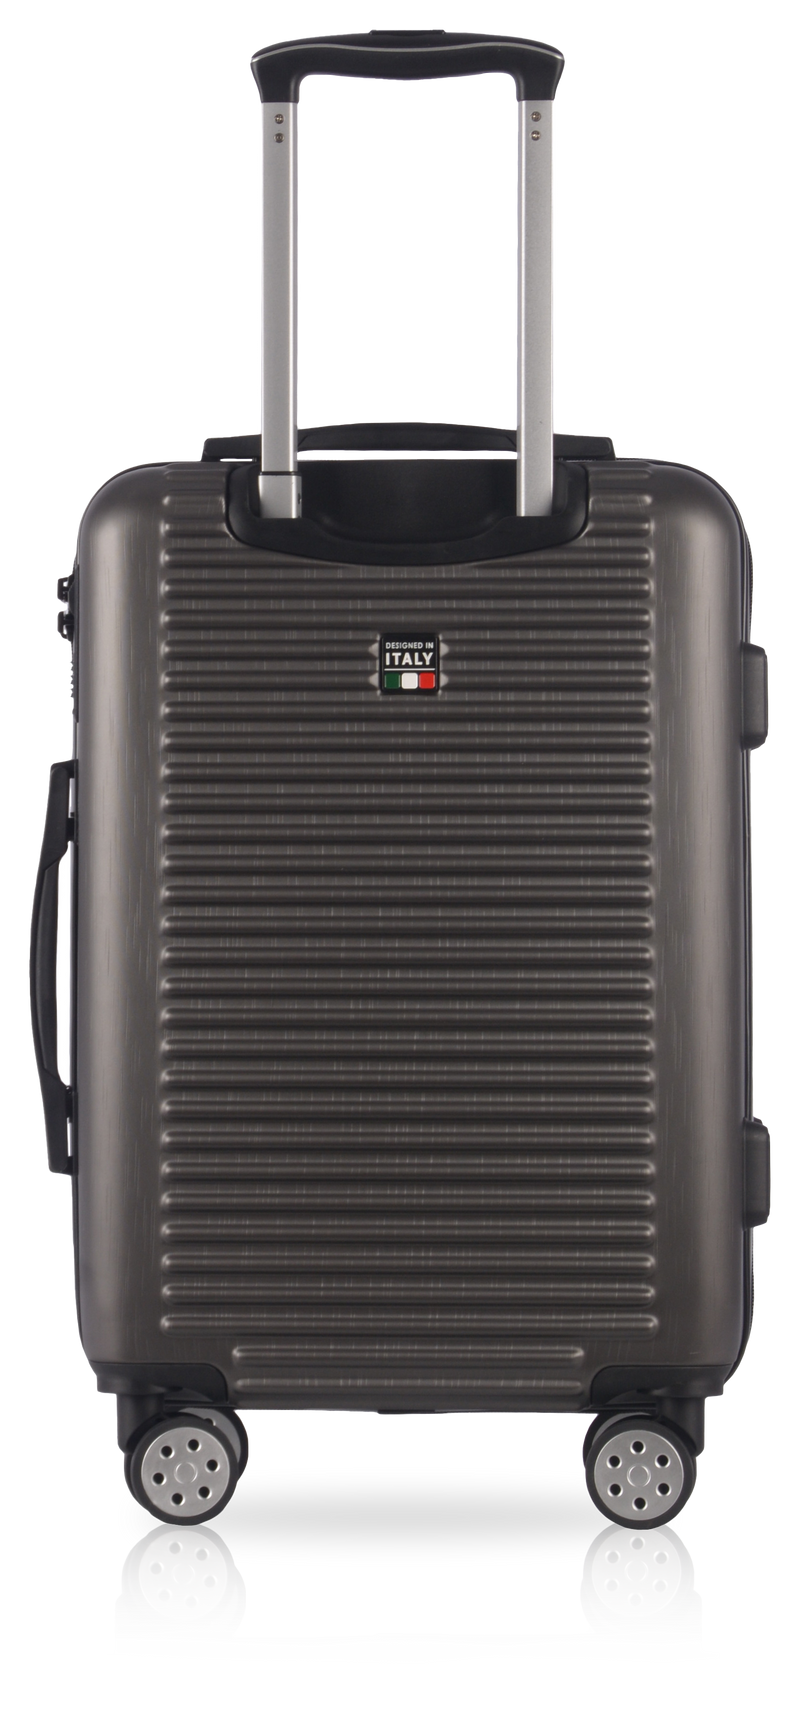 TUCCI Italy SOSTEGNO (20", 26", 30") - 03 PC Set Spinner Wheeled Suitcase Collection